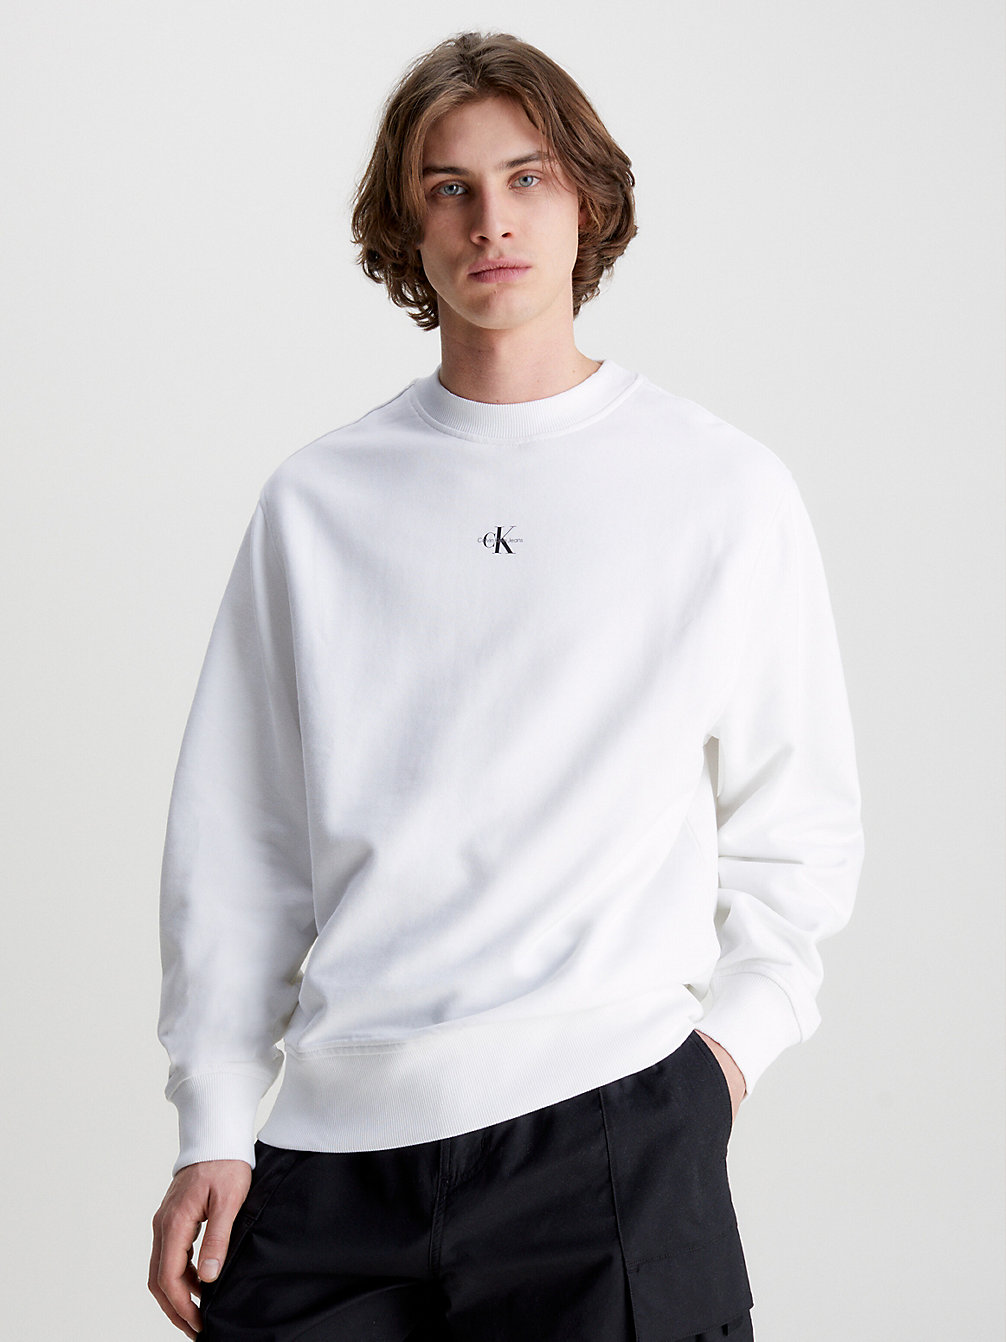 Sweat-Shirt Relaxed Avec Monogramme > BRIGHT WHITE > undefined hommes > Calvin Klein